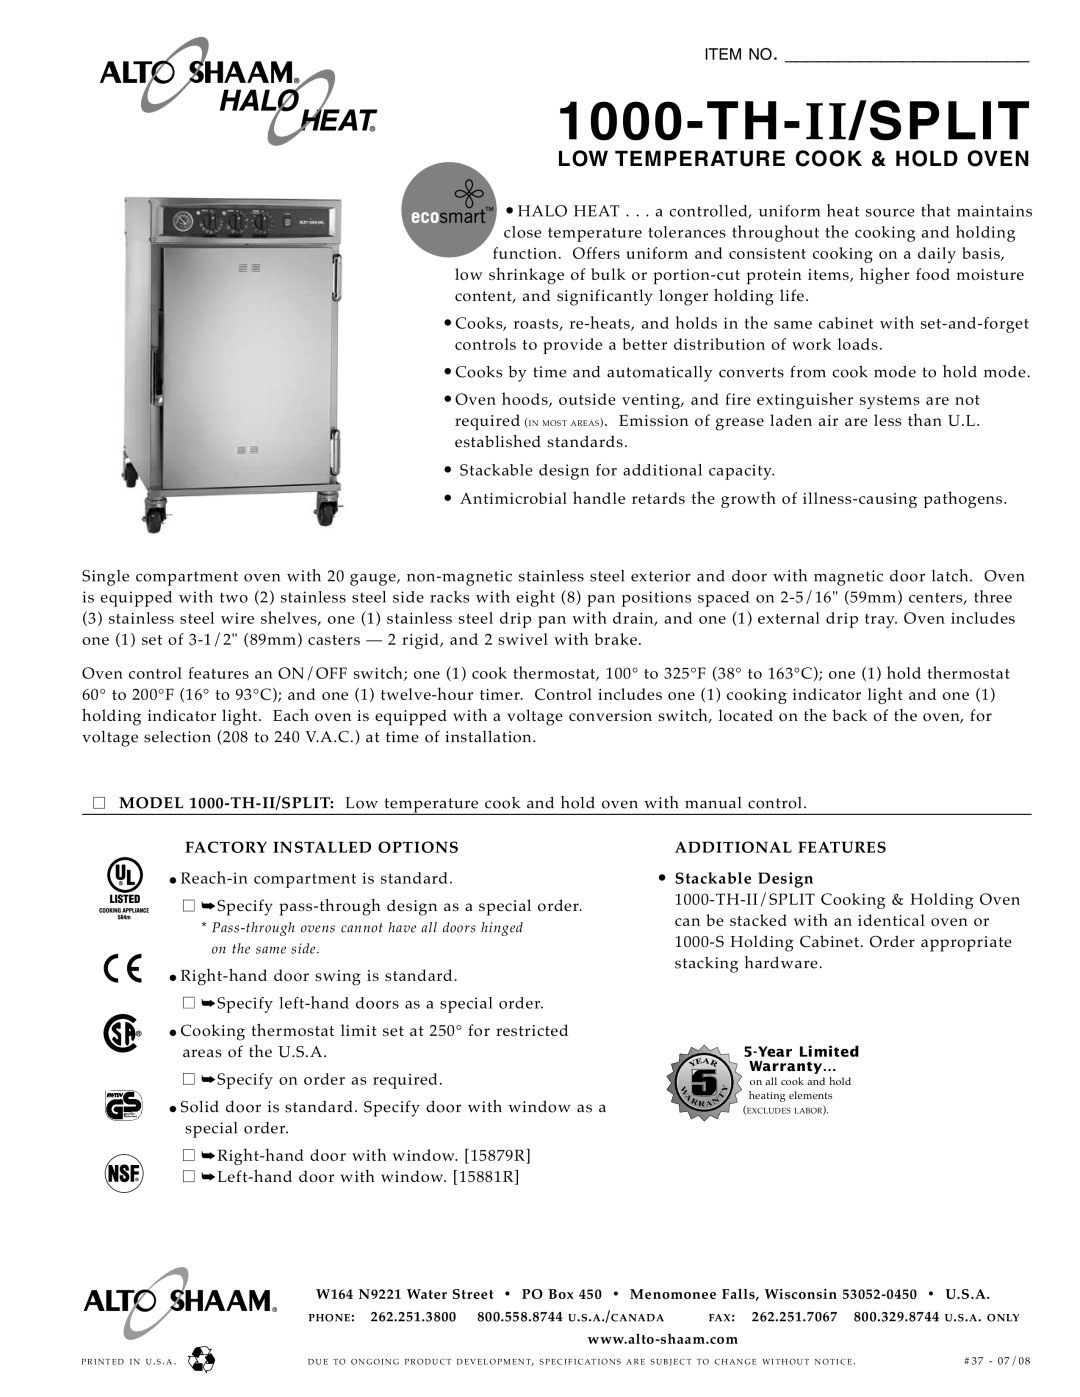 Alto-Shaam 1000-TH-II/Spilt warranty Split, Low Temperature Cook & Hold Oven, Item No, Facto Ry Ins Talled O Pti Ons 